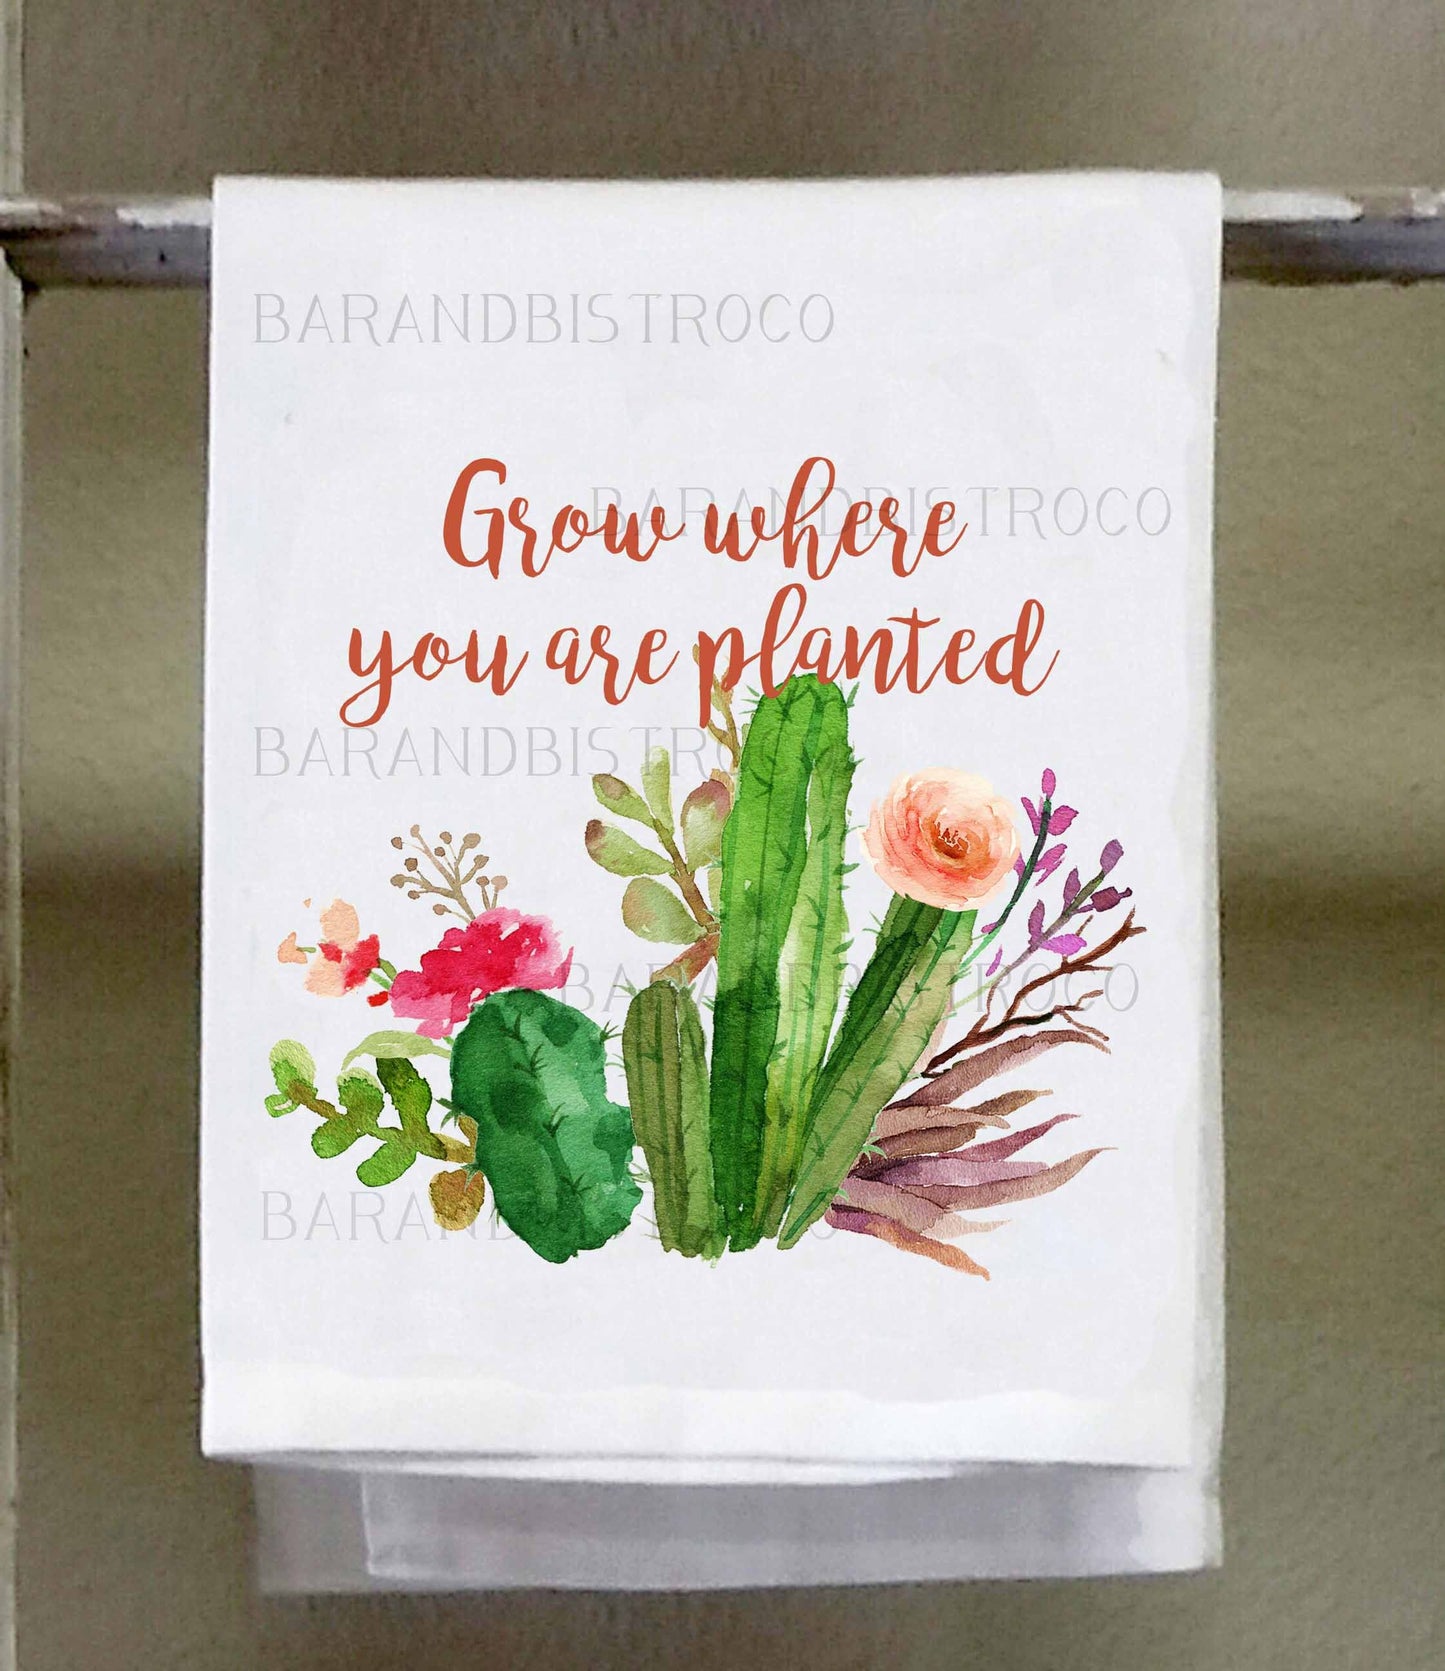 Southwest Dish Towel, Grow where you are planted, cactus